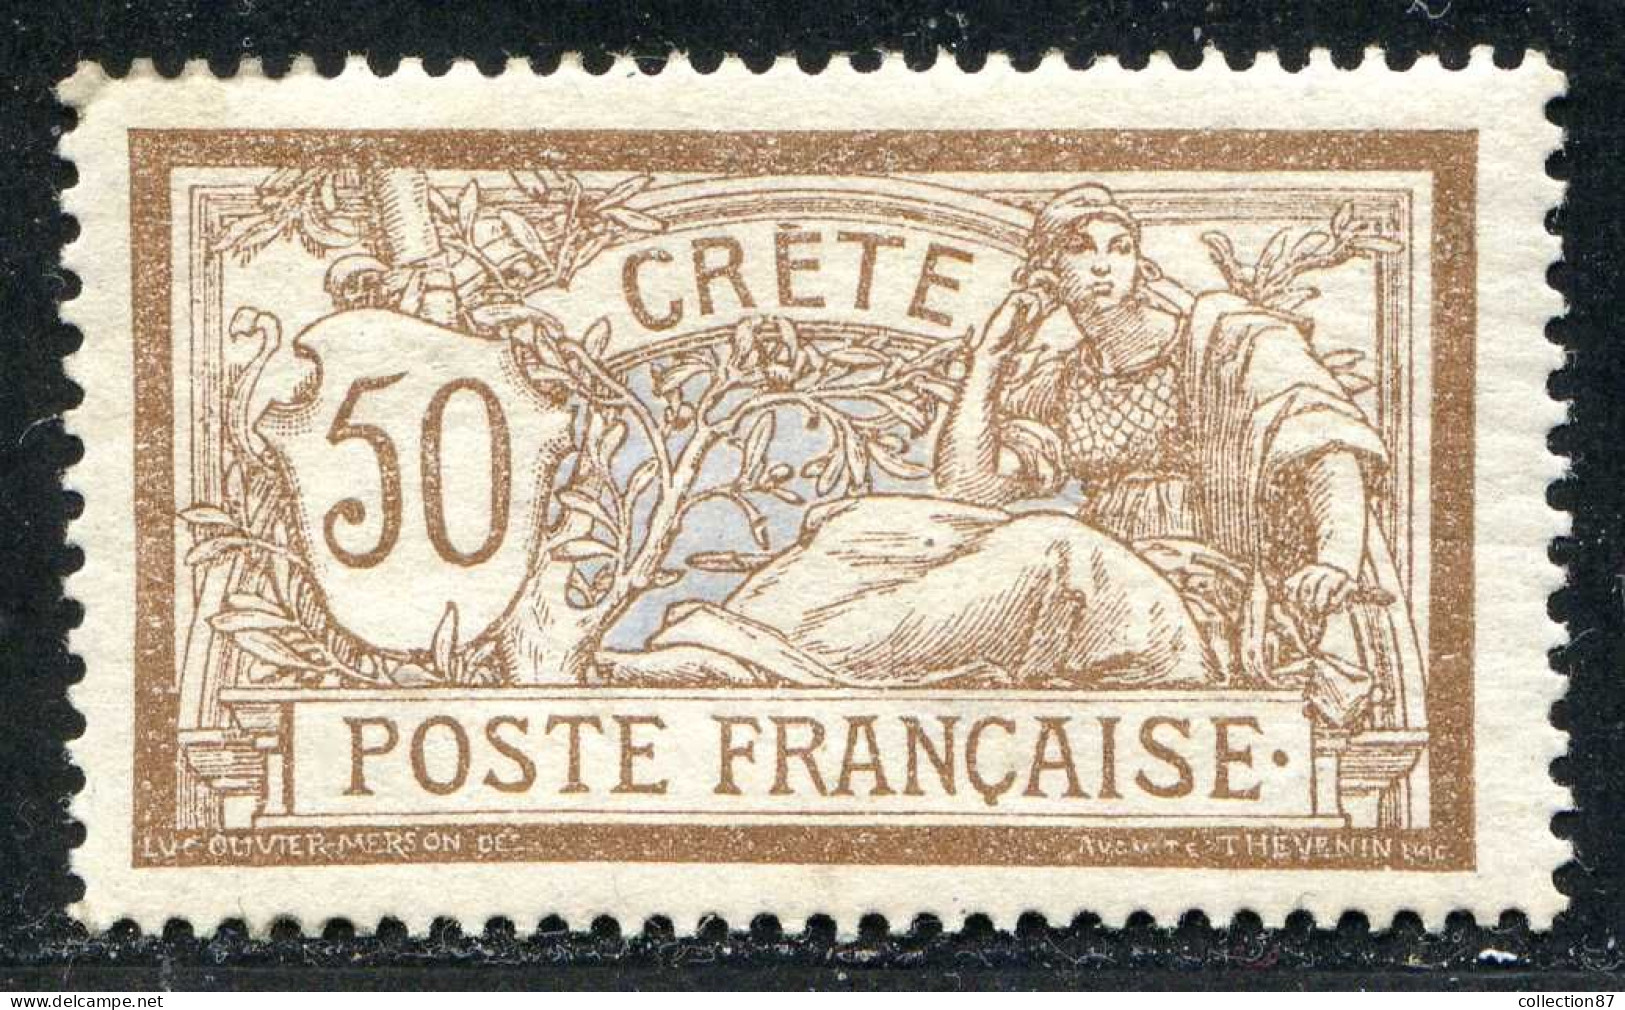 REF 091 > CRETE < Yv N° 12 * Centrage Correct < Neuf Ch. Dos Visible - MH * Cote 20 € - Ongebruikt